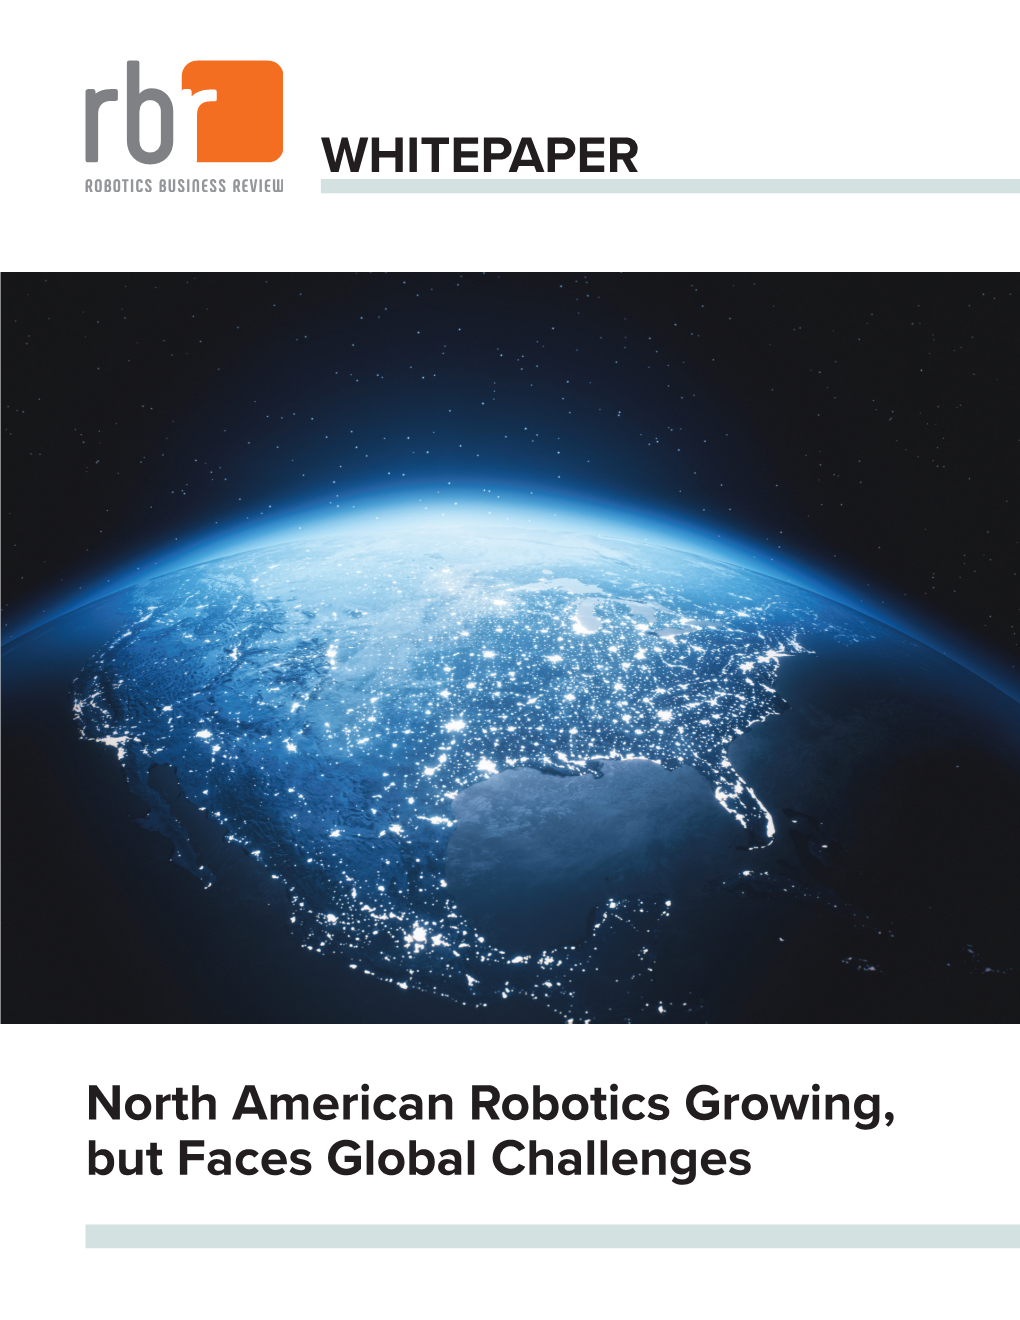 North American Robotics Growing, but Faces Global Challenges